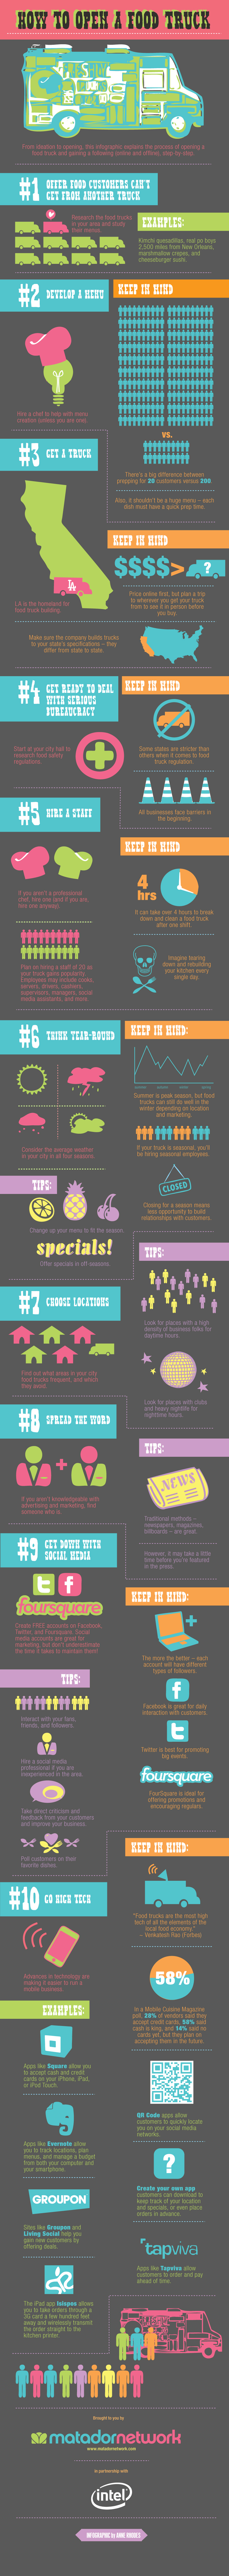 How to open a food truck [Infographic]